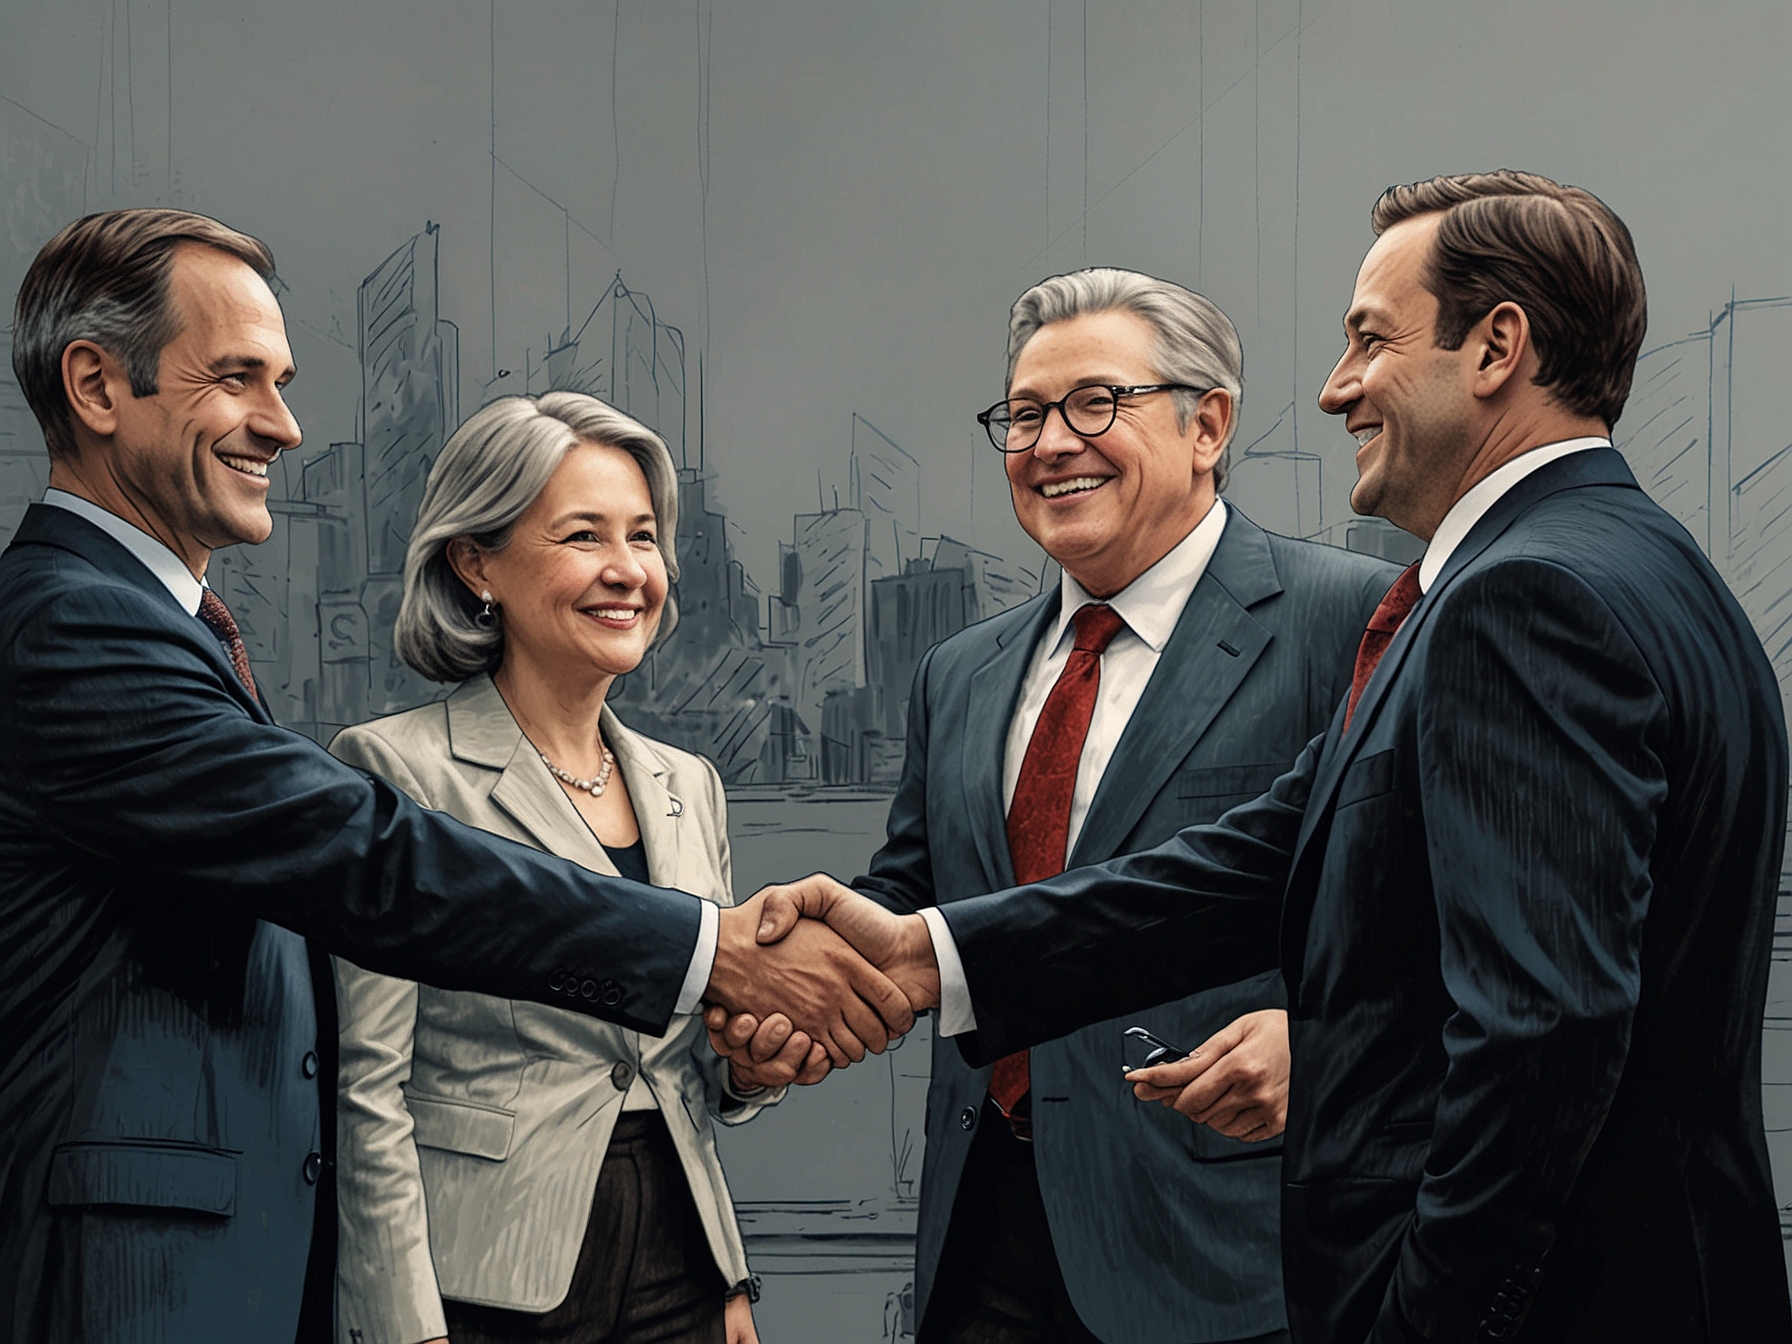 An illustration showing Atome Financial and EvolutionX executives shaking hands, symbolizing the strategic partnership and the $100 million debt facility agreement.